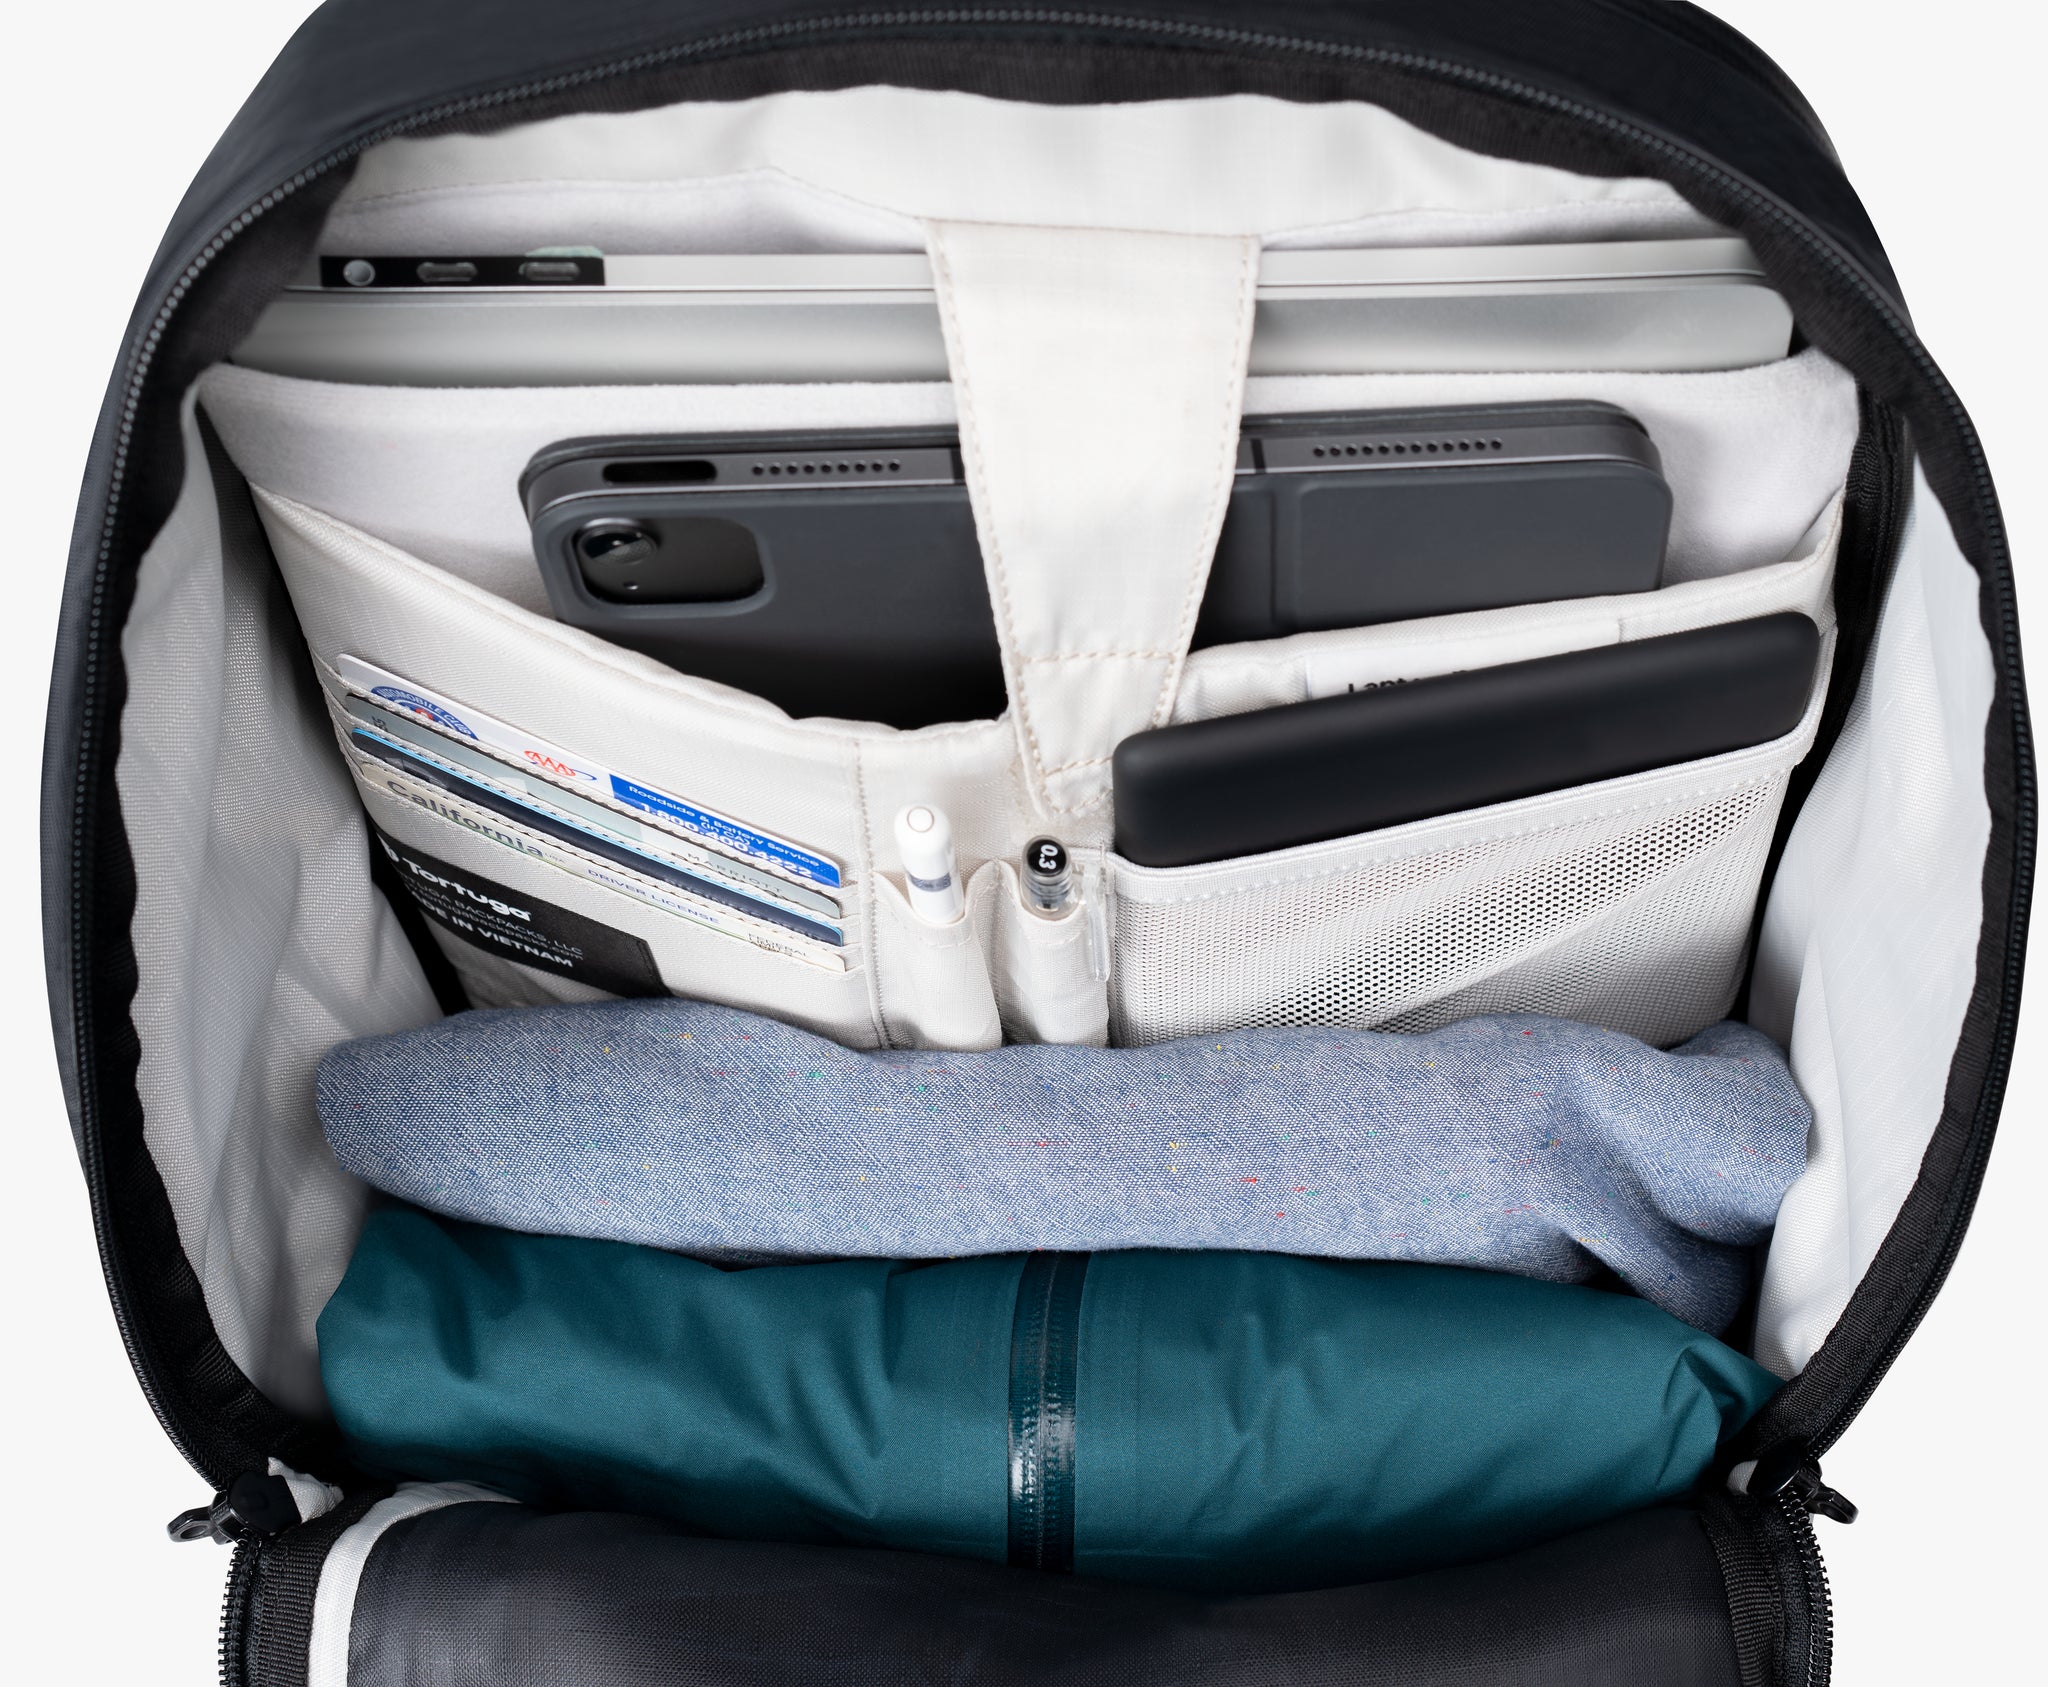 main compartment opens almost the entire width of the backpack